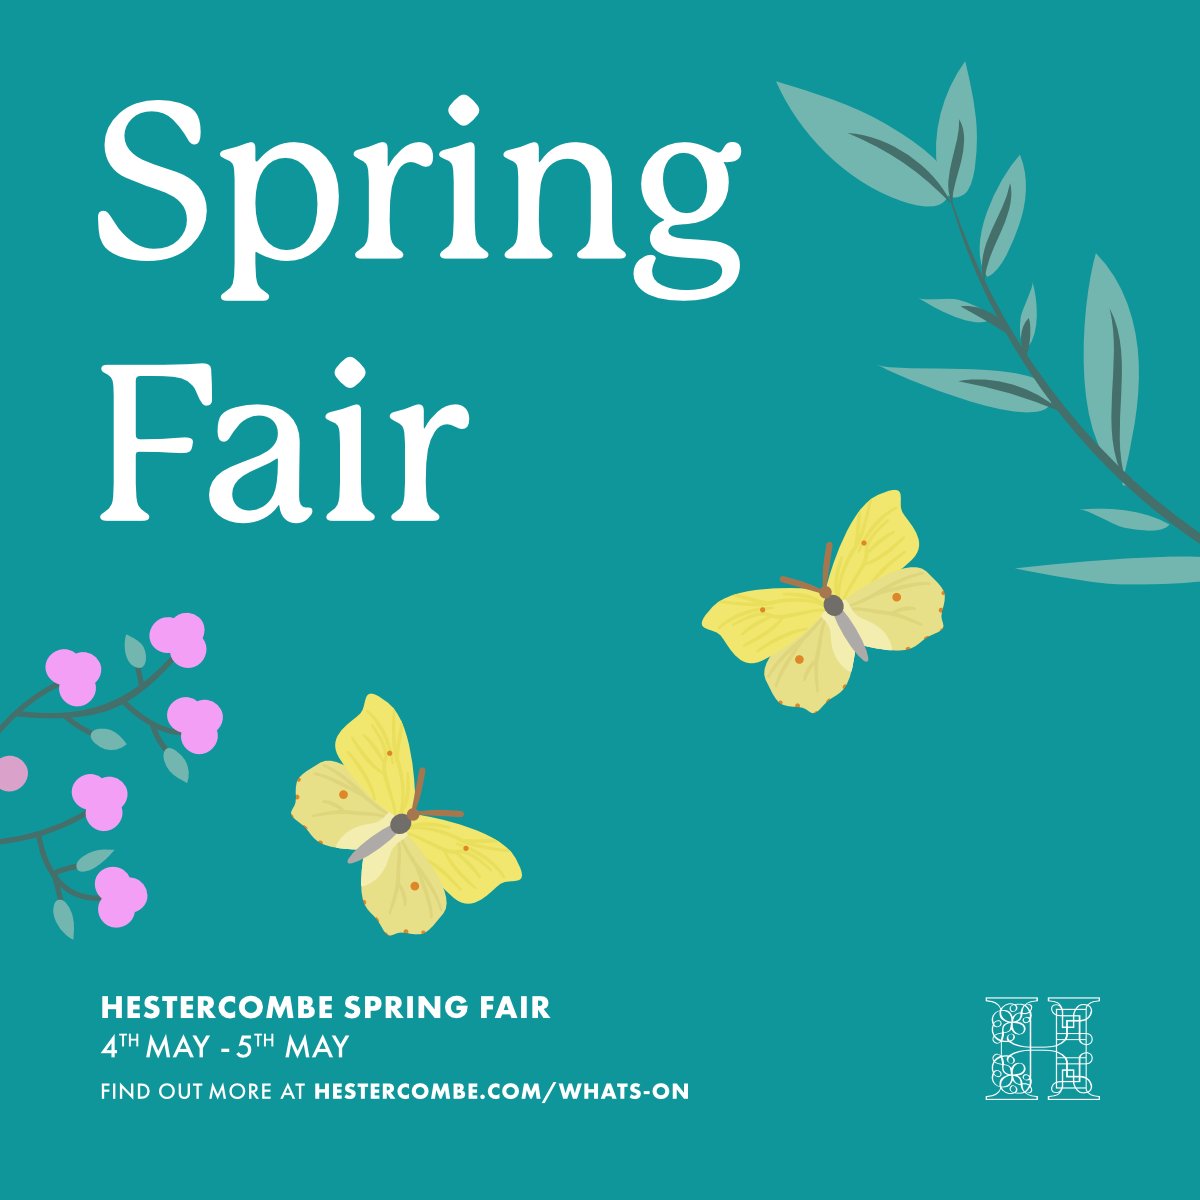 We can't wait to welcome you to our first Spring Fair this weekend (4th and 5th May). We have over 40 artisan stalls including Wonky Pots by Dawn, Brew Planet, Lulu's Natural Dog Treats, Dough Bros, St Austell Brewery & many more. hestercombe.com/whats-on/sprin…